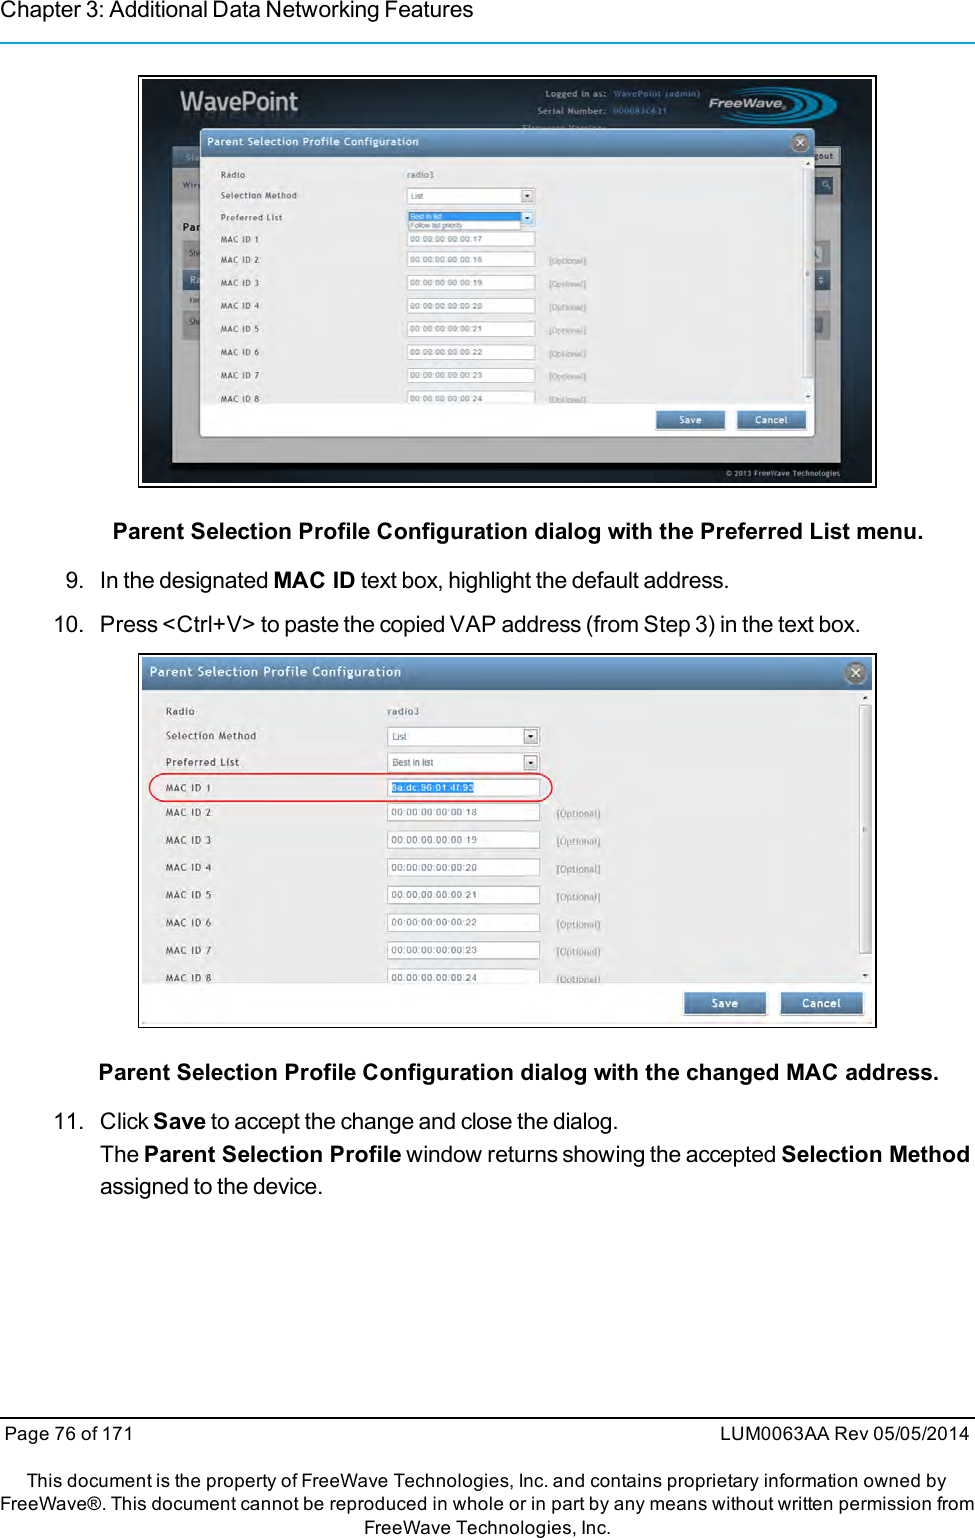 Chapter 3: Additional Data Networking FeaturesParent Selection Profile Configuration dialog with the Preferred List menu.9. In the designated MAC ID text box, highlight the default address.10. Press &lt;Ctrl+V&gt; to paste the copied VAP address (from Step 3) in the text box.Parent Selection Profile Configuration dialog with the changed MAC address.11. Click Save to accept the change and close the dialog.The Parent Selection Profile window returns showing the accepted Selection Methodassigned to the device.Page 76 of 171 LUM0063AA Rev 05/05/2014This document is the property of FreeWave Technologies, Inc. and contains proprietary information owned byFreeWave®. This document cannot be reproduced in whole or in part by any means without written permission fromFreeWave Technologies, Inc.